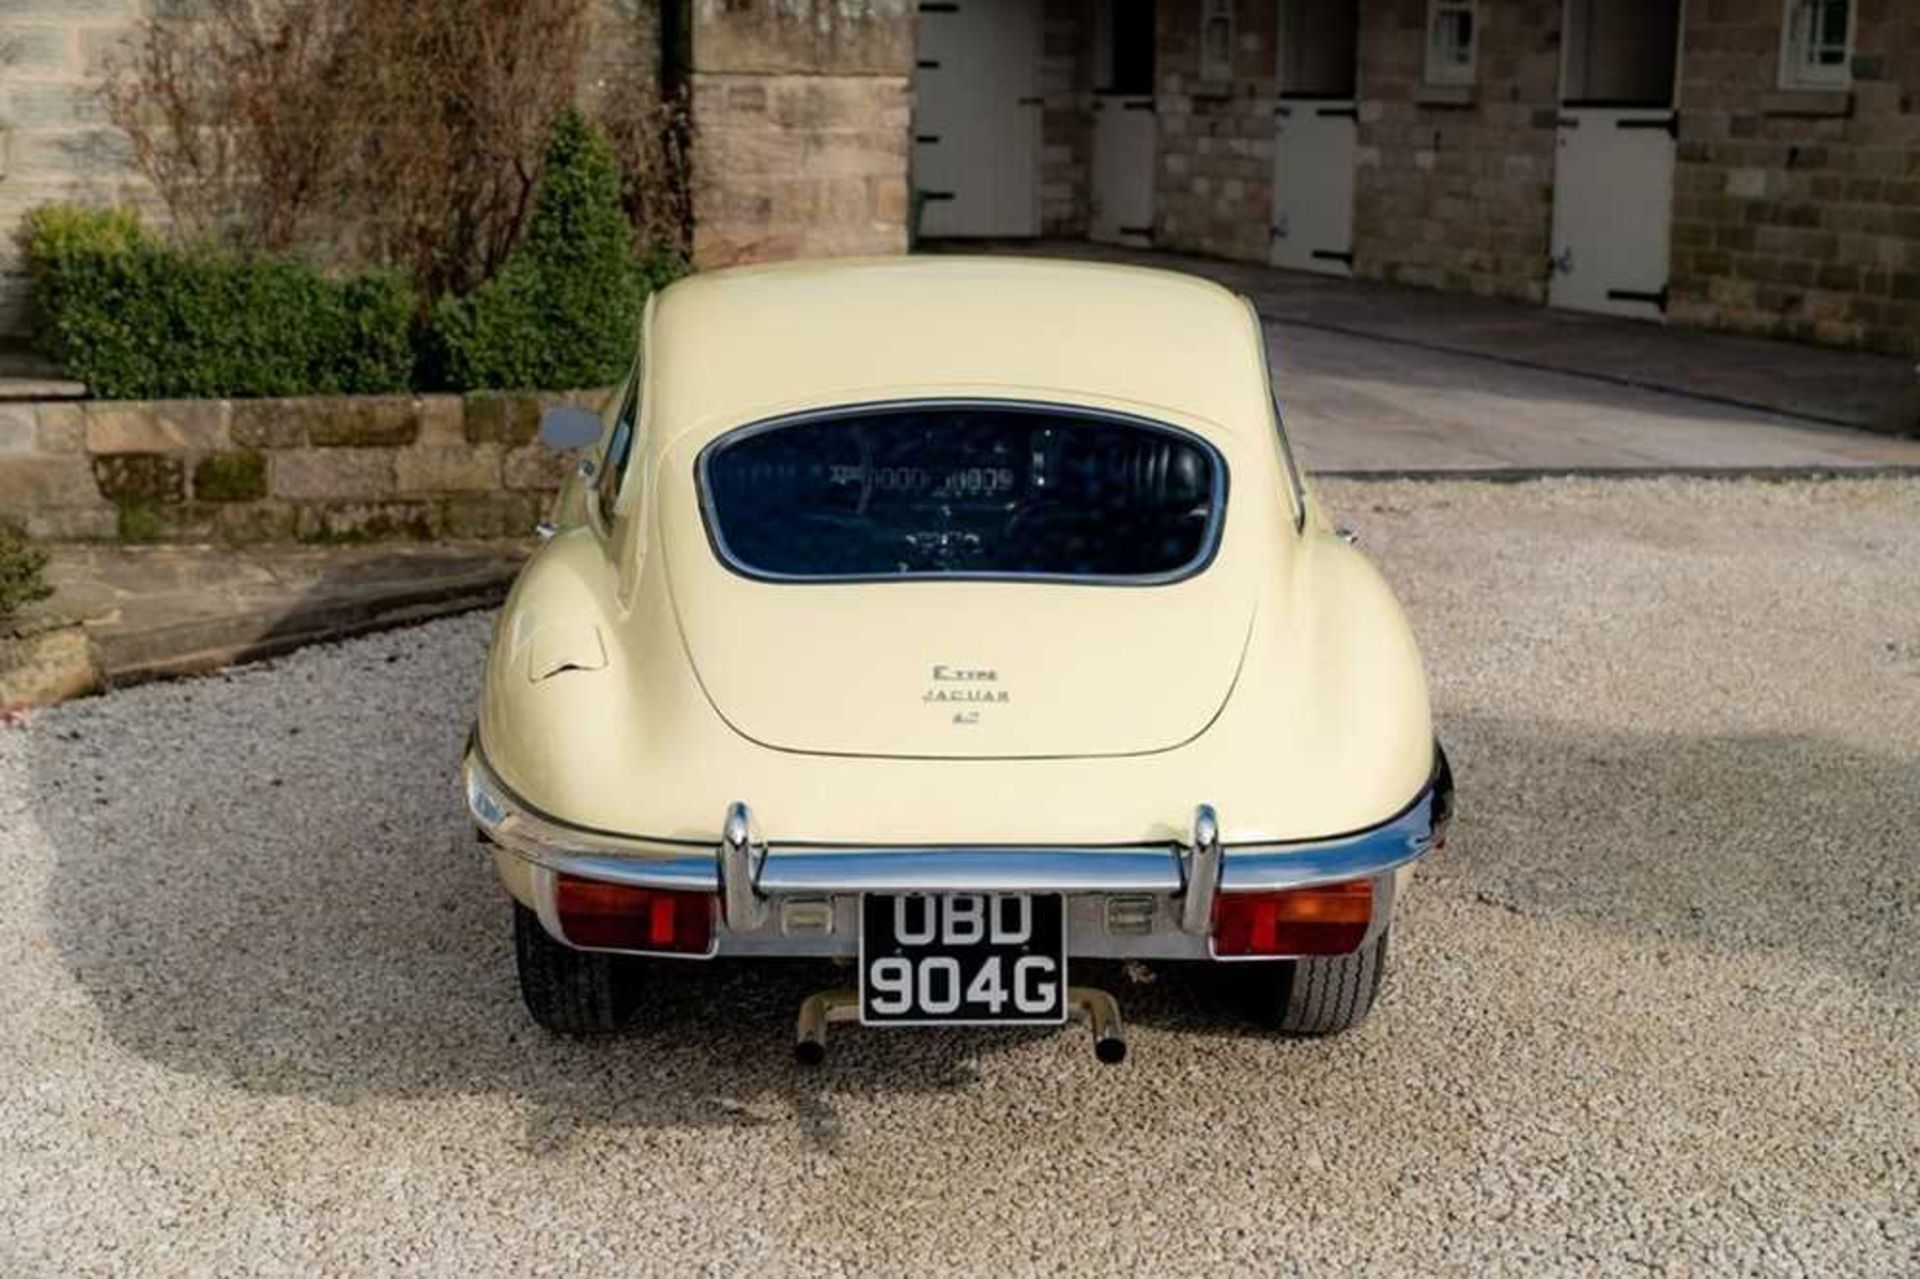 1968 Jaguar E-Type 4.2 Litre Coupe Genuine 44,000 miles from new - Image 36 of 68